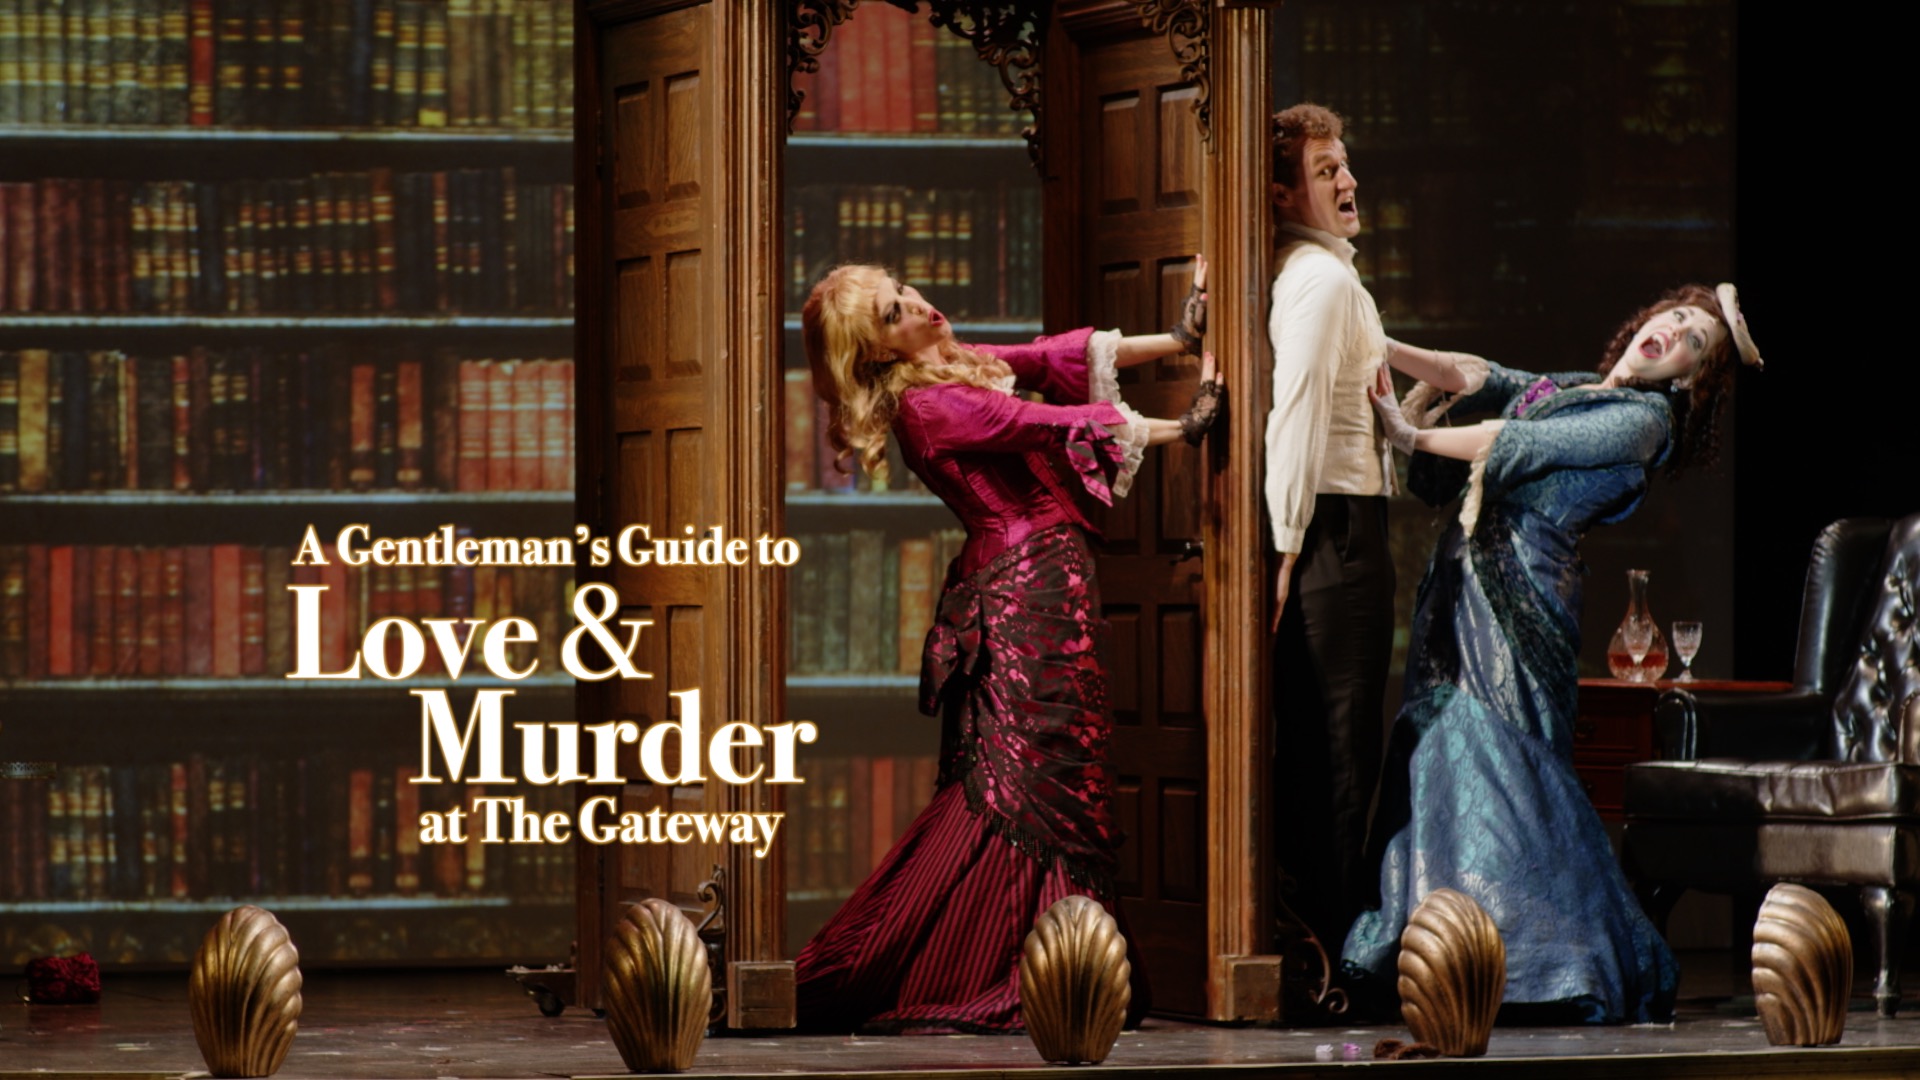 Meet the cast of A Gentleman's Guide To Love And Murder at The Gateway